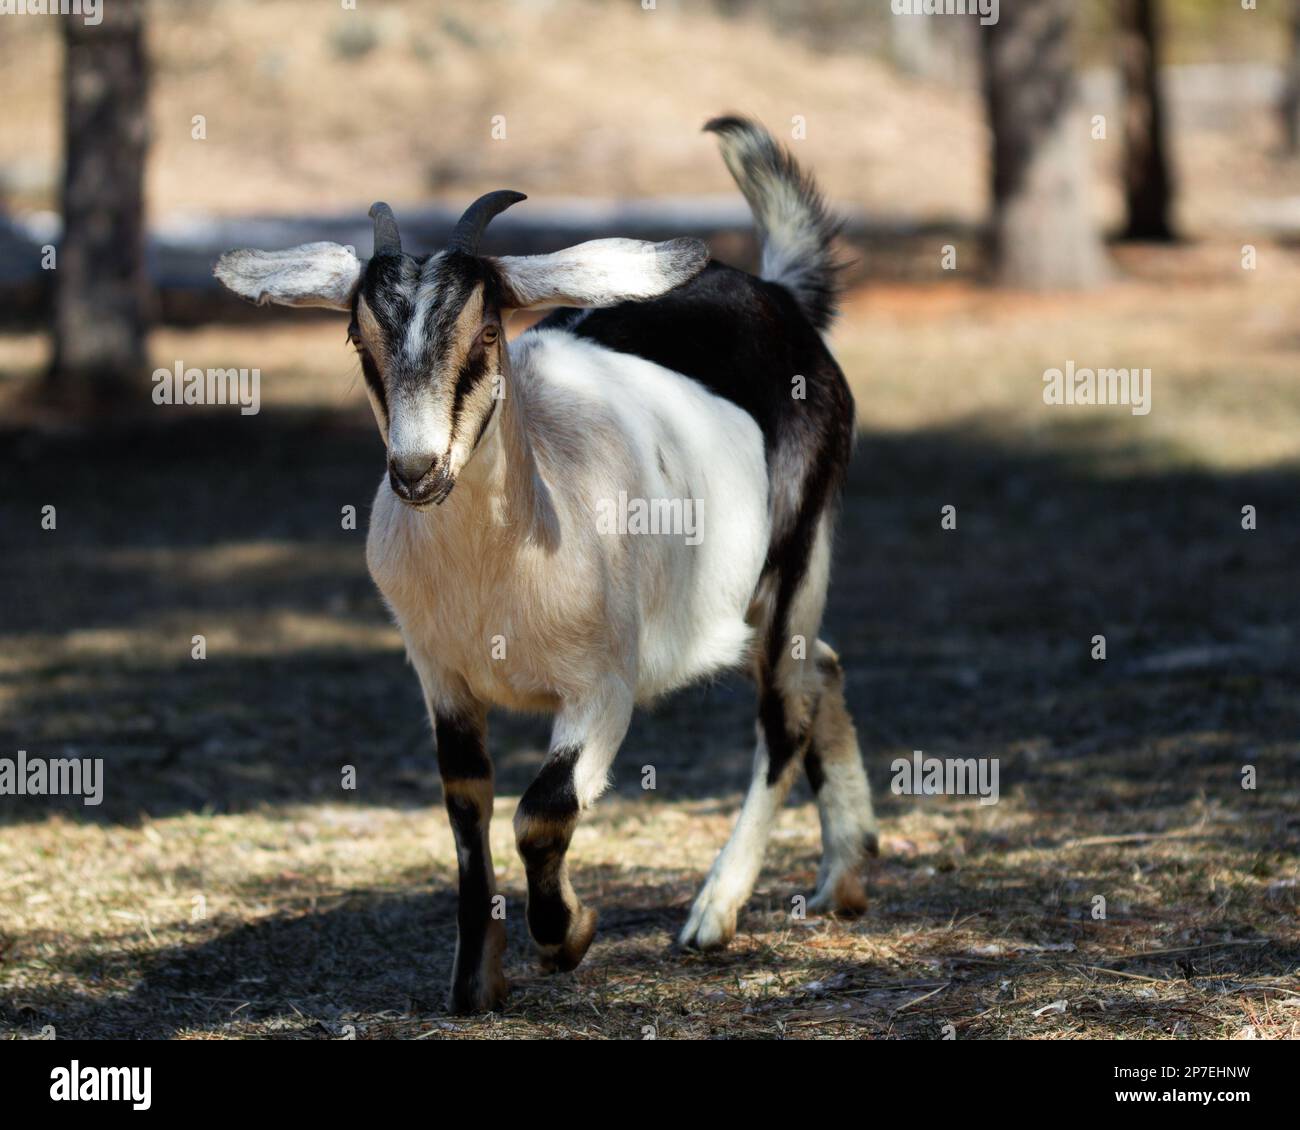 A black and white goat is captured running on a grassy terrain, showcasing its agility and strength Stock Photo